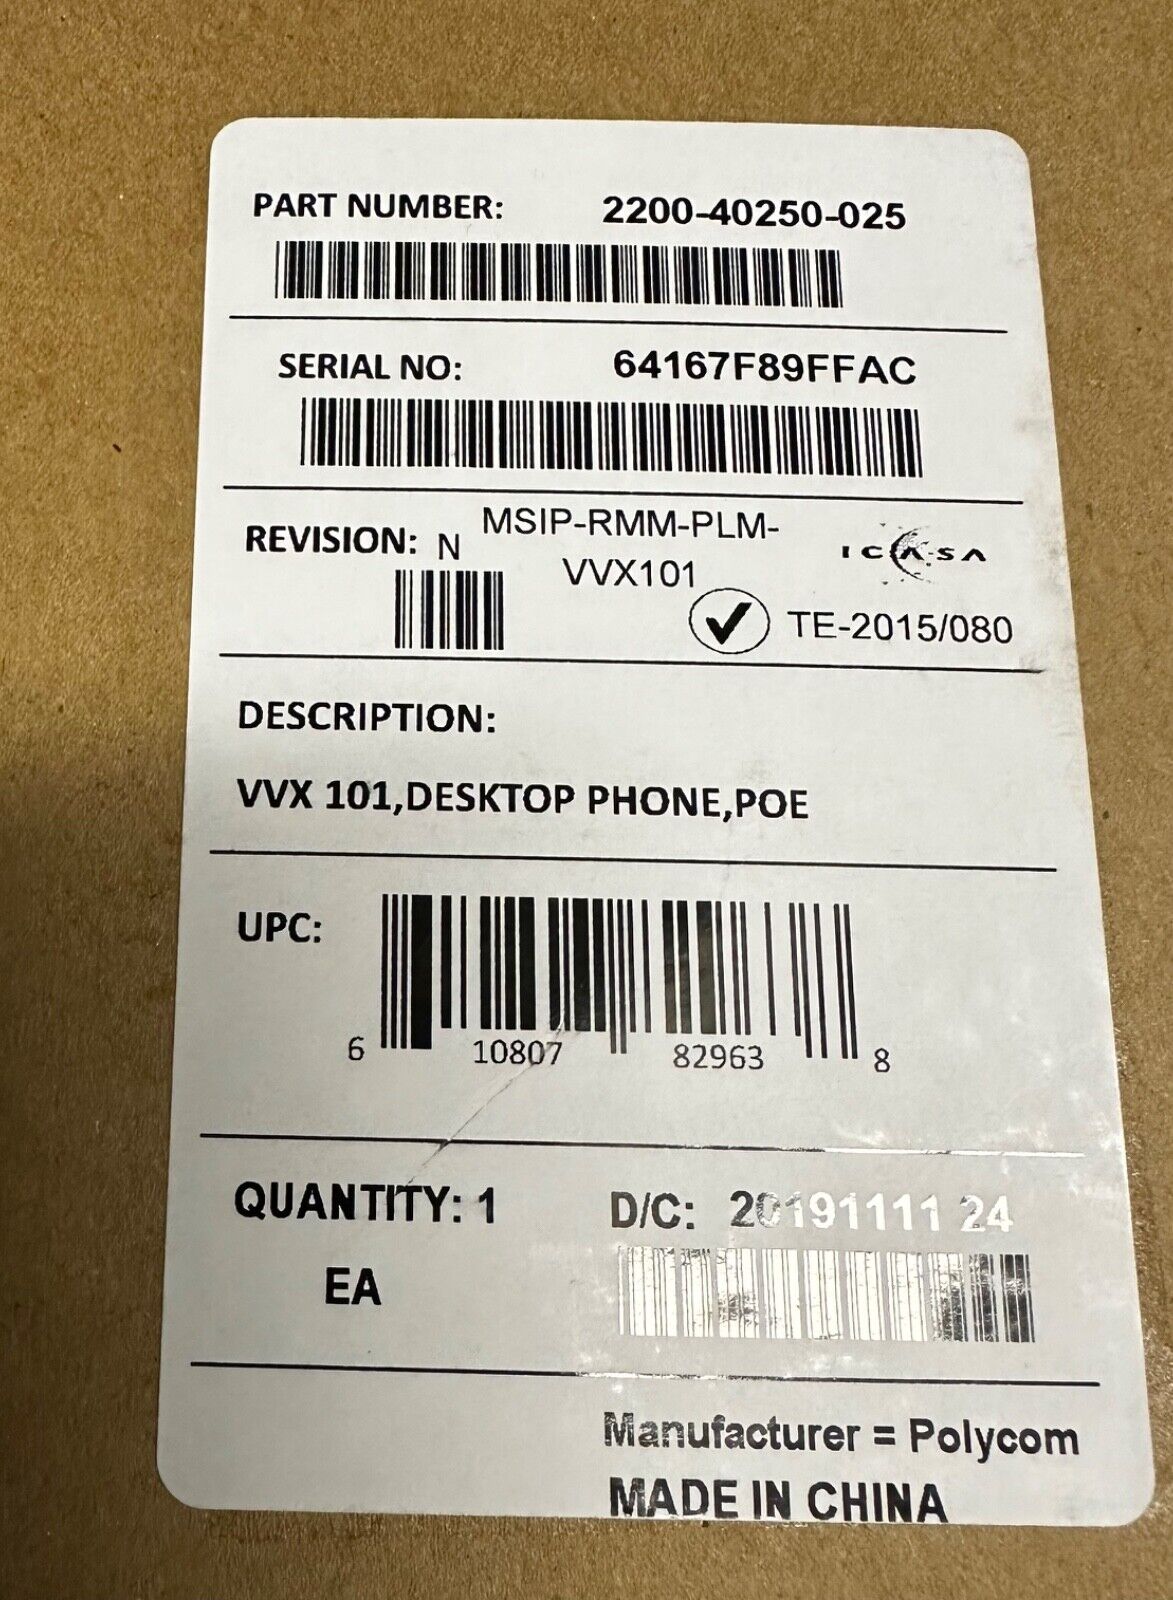 NEW IN BOX - Polycom 2200-40250-025 VVX 101 Entry Level IP VOIP POE Telephone